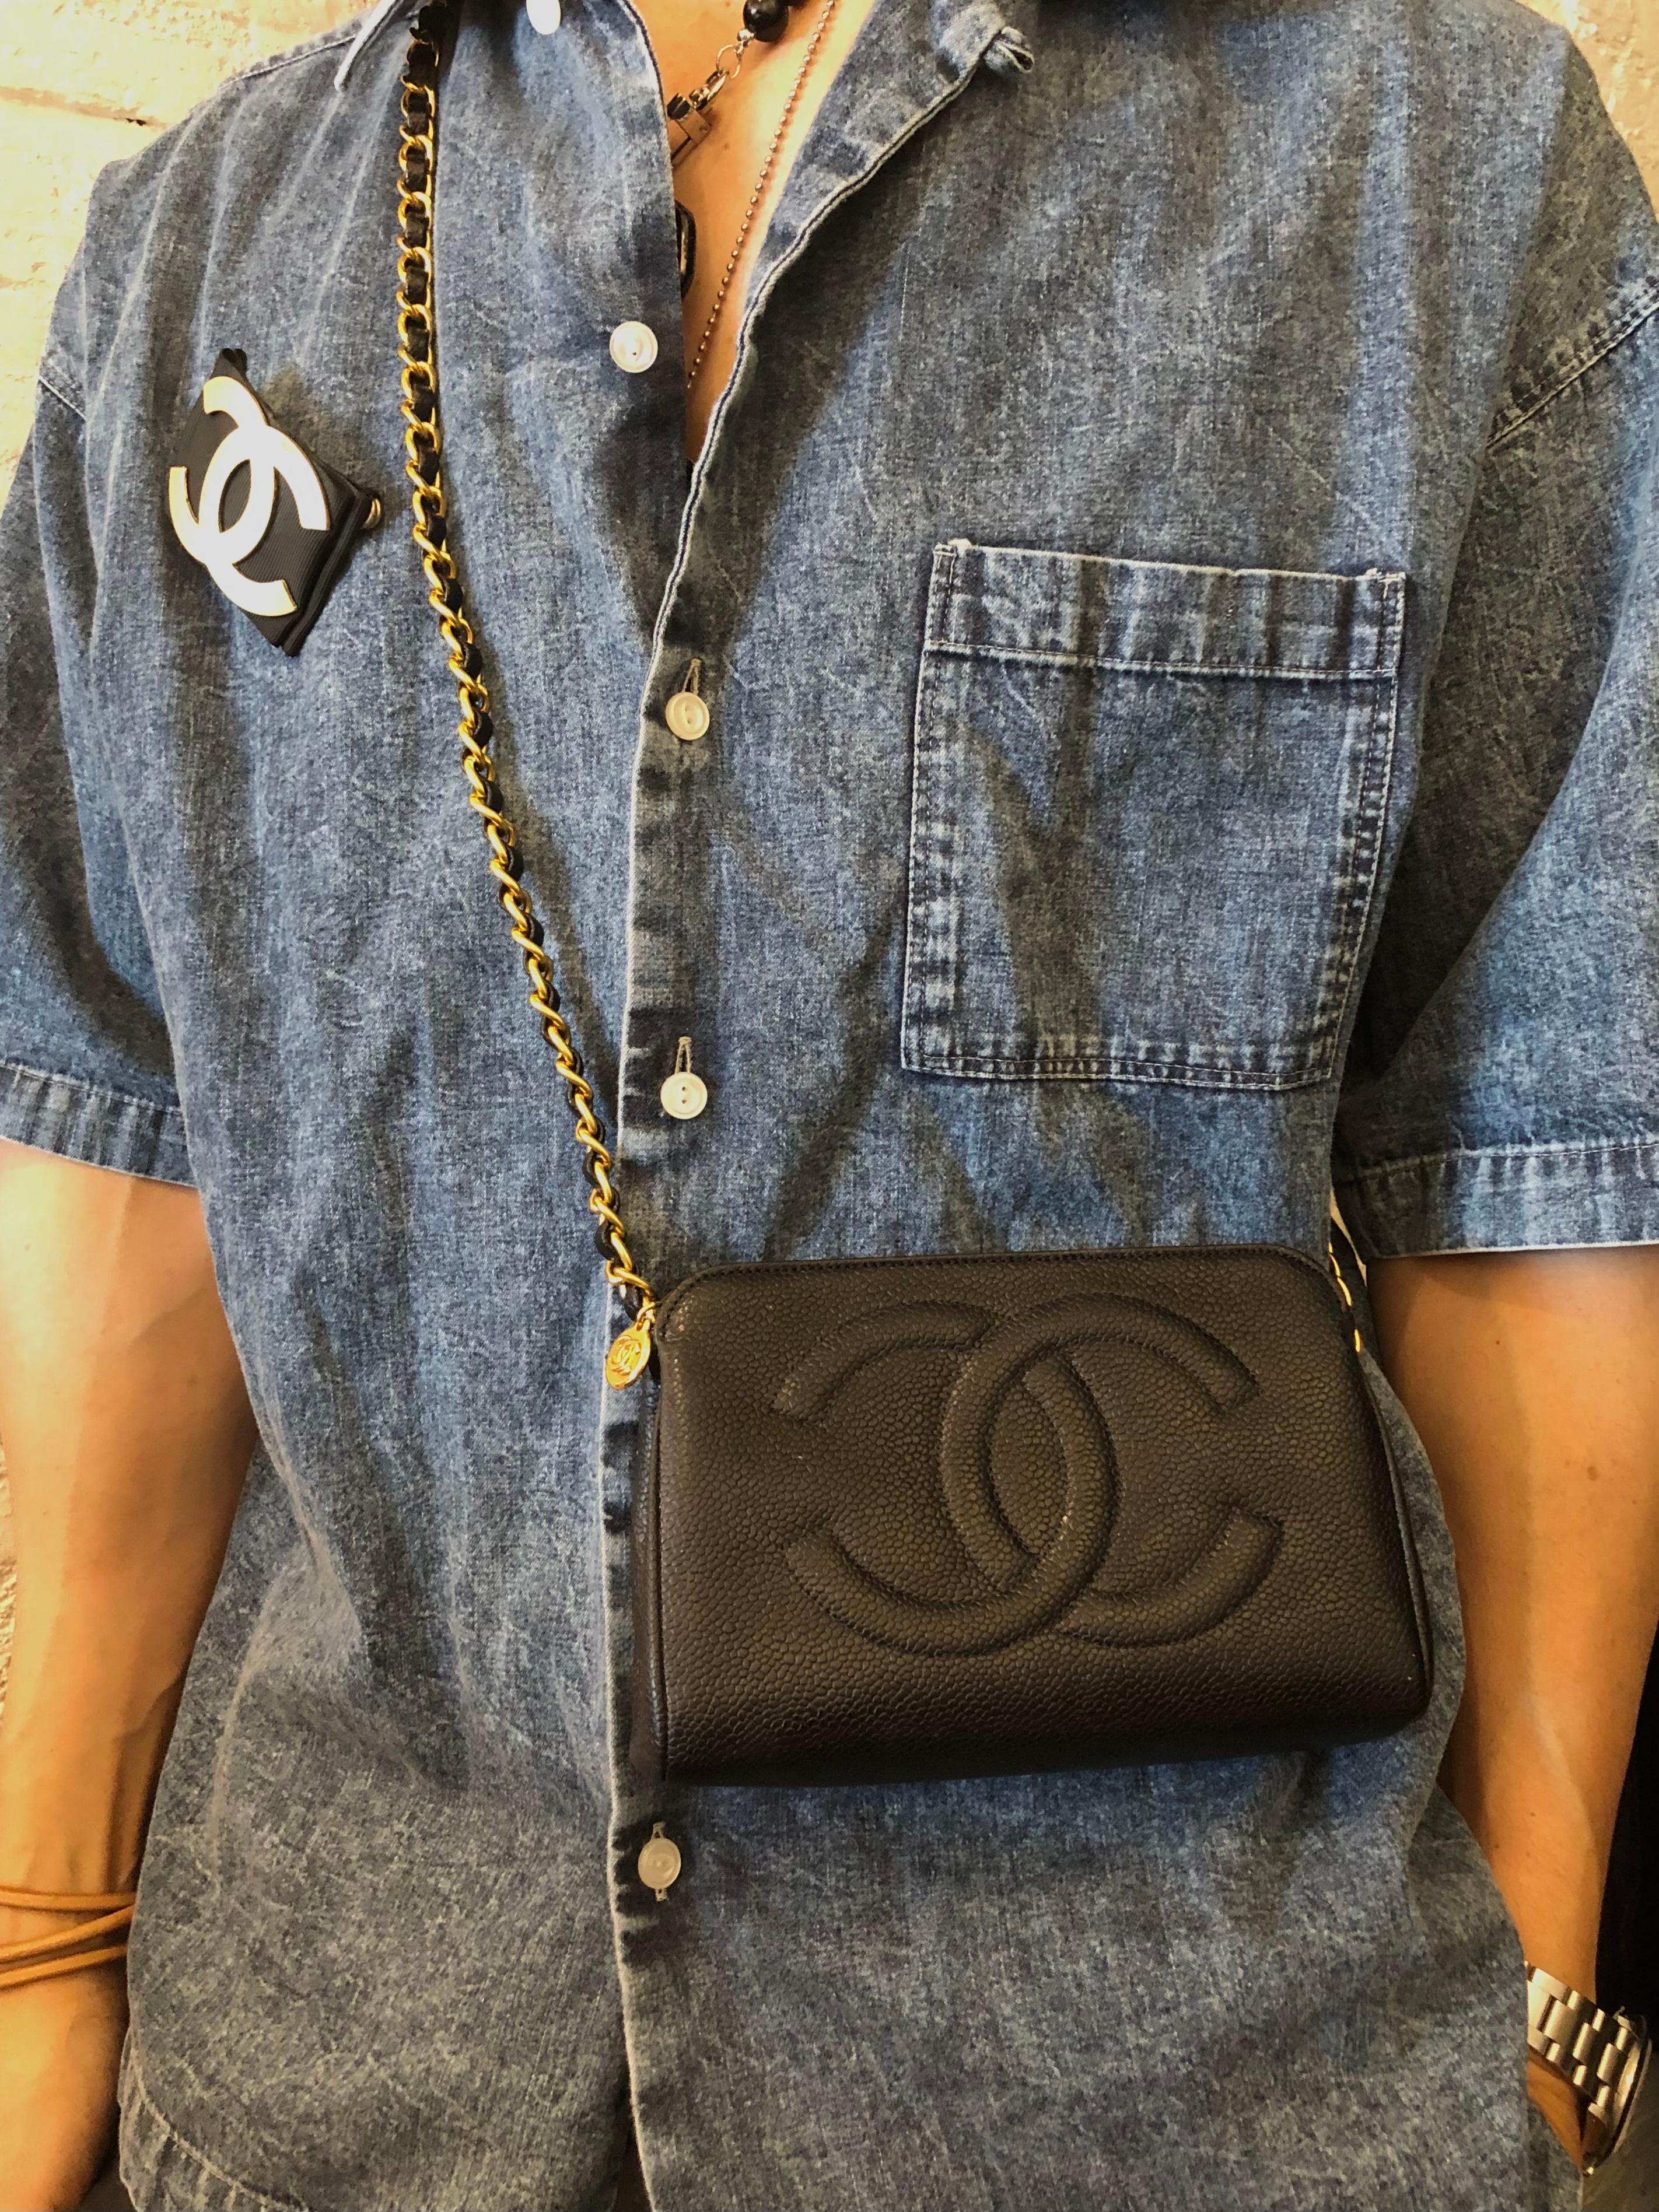 This 1990s CHANEL pouch bag is crafted of caviar leather in black. Top zipper closure opens to a newly re-lined interior in beige. Holo 5xxxxxx series made in Italy (stamps removed in the re-lining process) Measures approximately 7 x 4 x 2 inches.